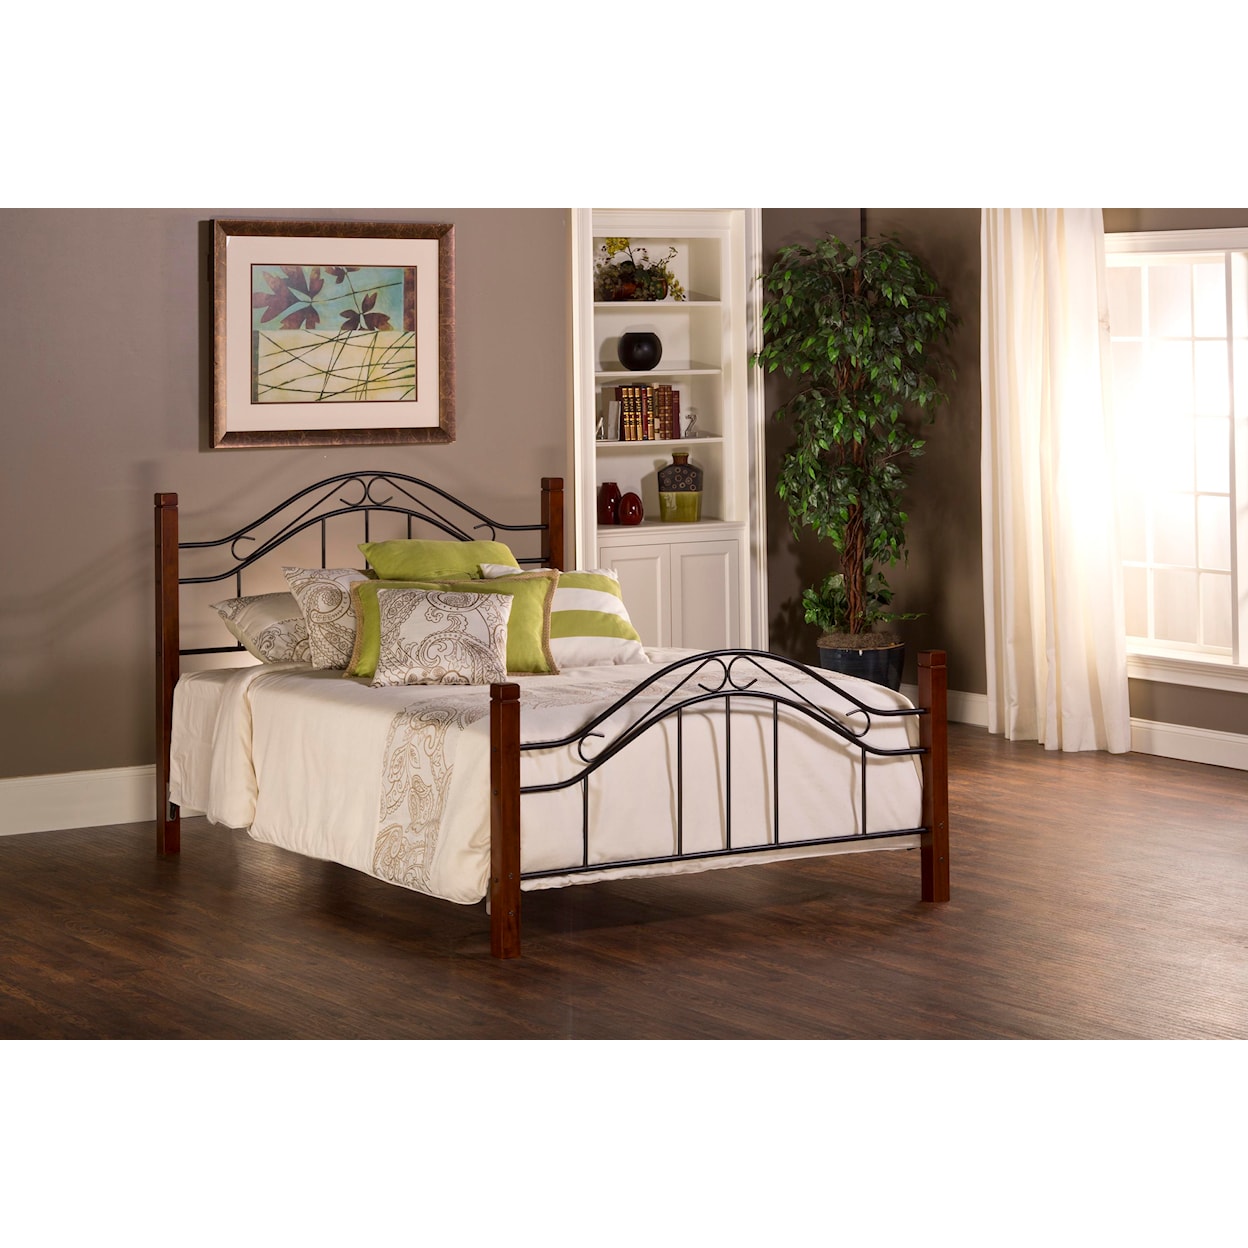 Hillsdale Metal Beds Matson Full Bed Set Without Rails